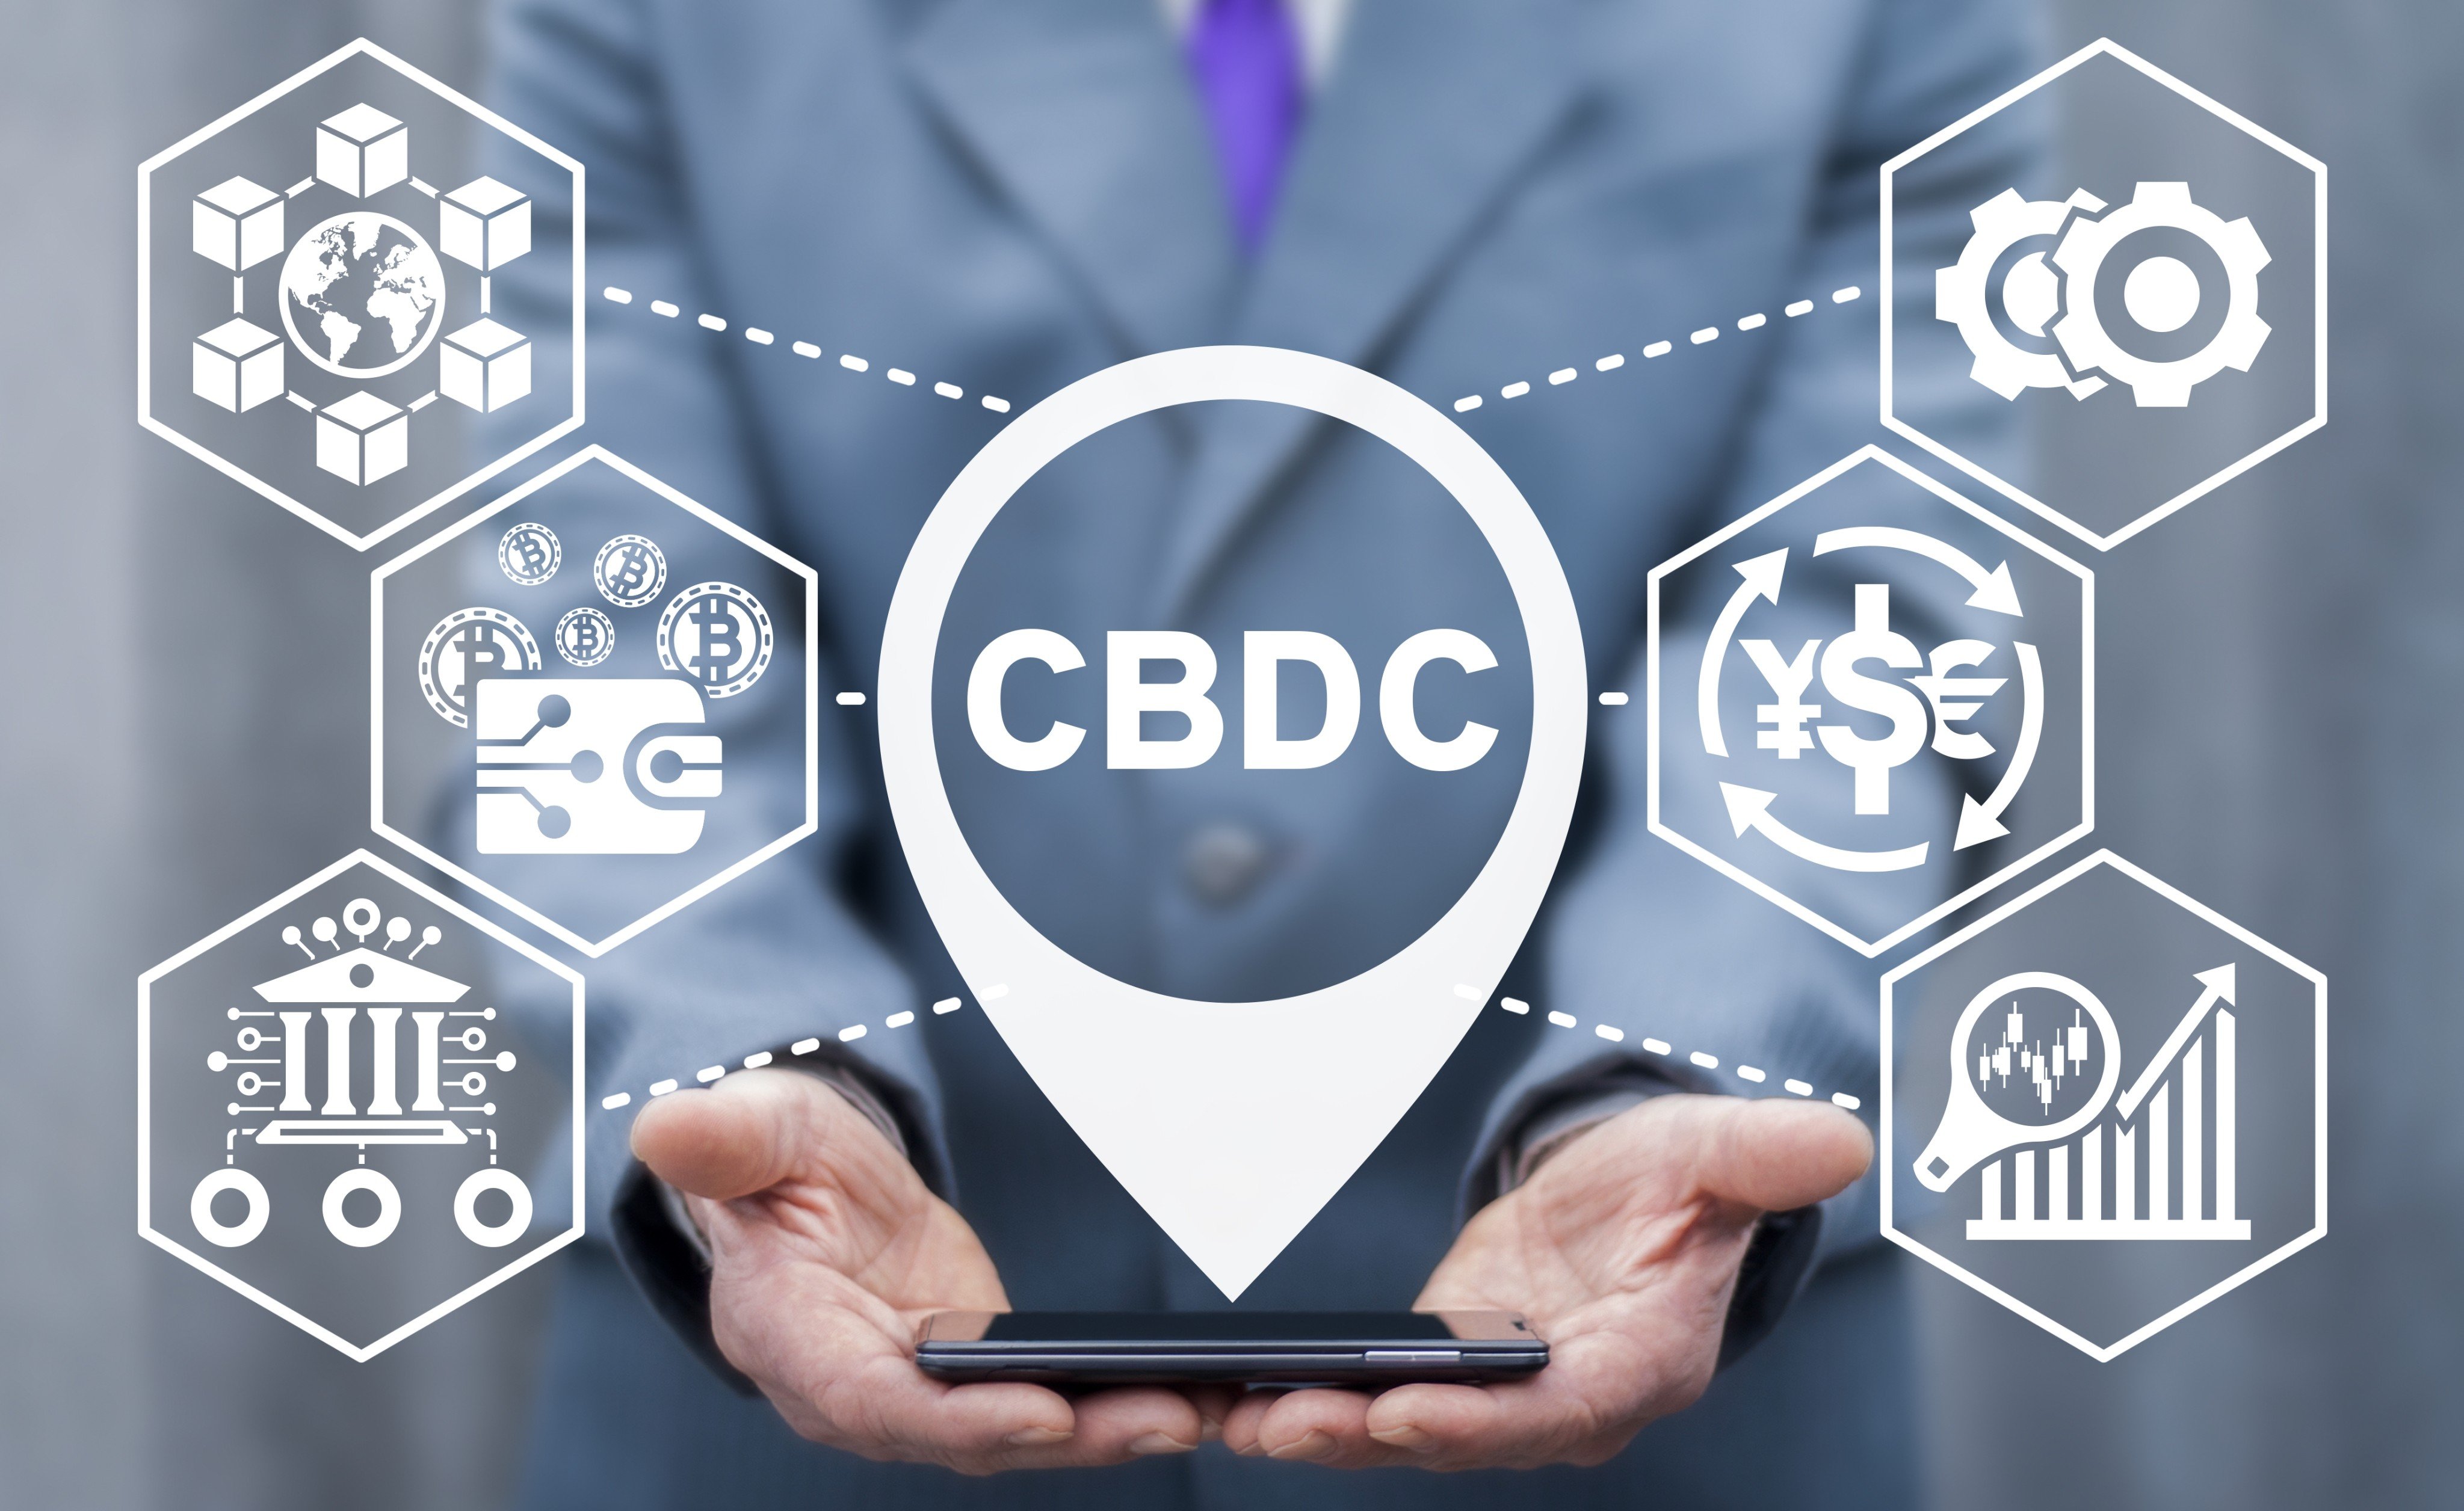 Wholesale CBDCs will enable instant processing of payments in the digital asset market while providing confidence and added functionalities enabled by tokenisation. Photo: Shutterstock